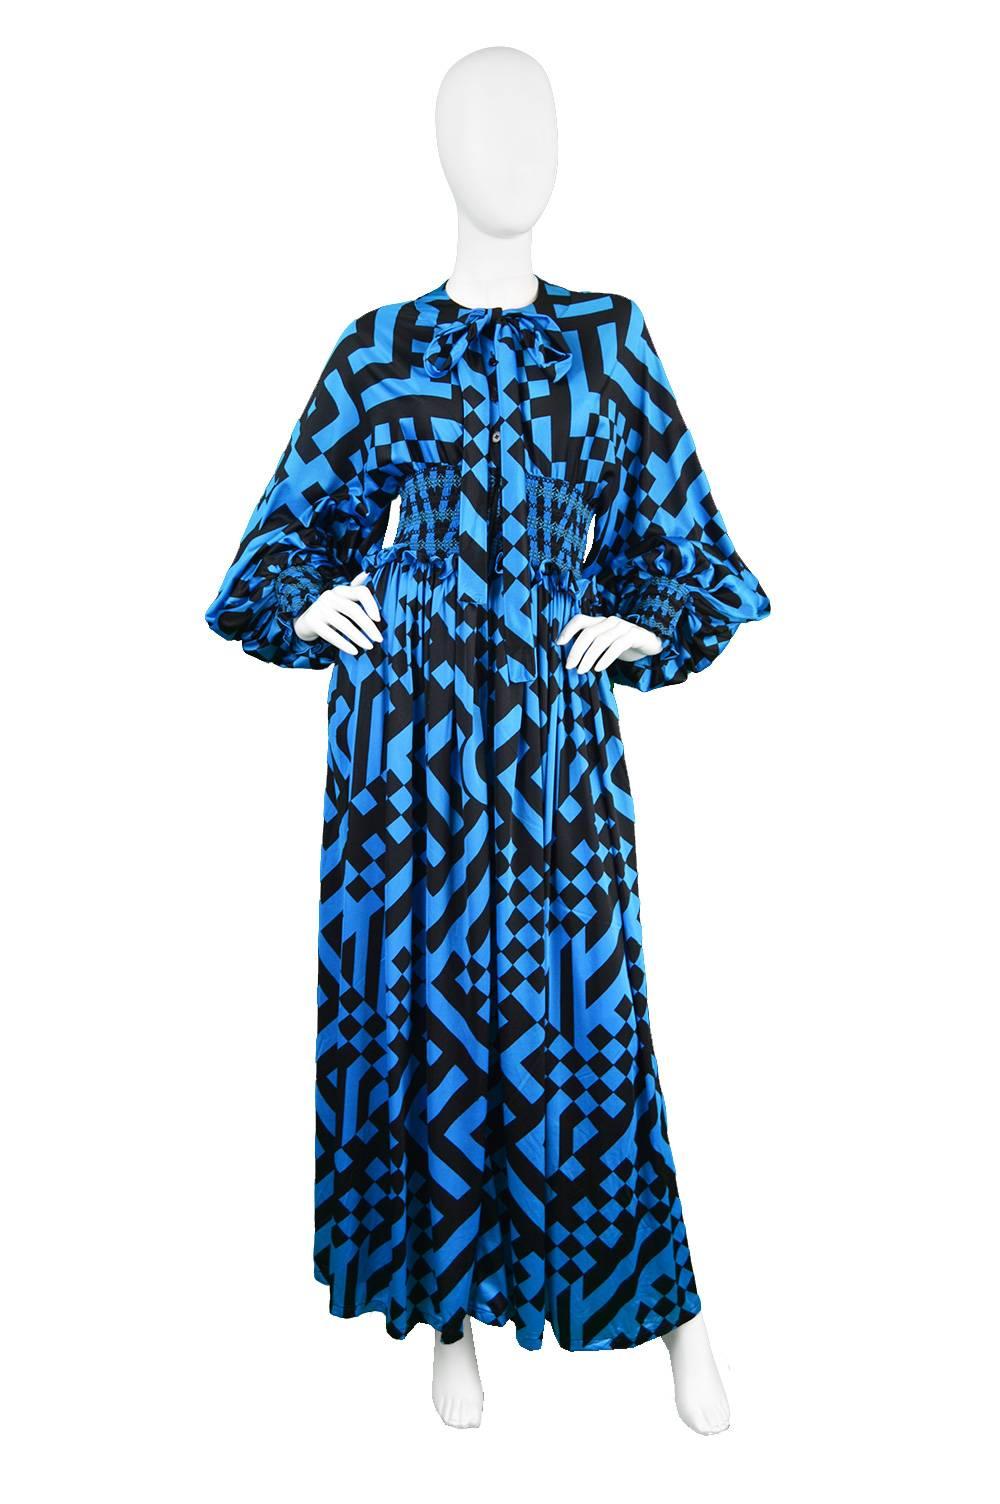 A stunning vintage maxi dress from the 1970s by genius vintage British designer, John Bates for Jean Varon, who was best known for his dramatic bohemian gowns in the 70s and this dress is a perfect example. In a blue synthetic jersey with a black op